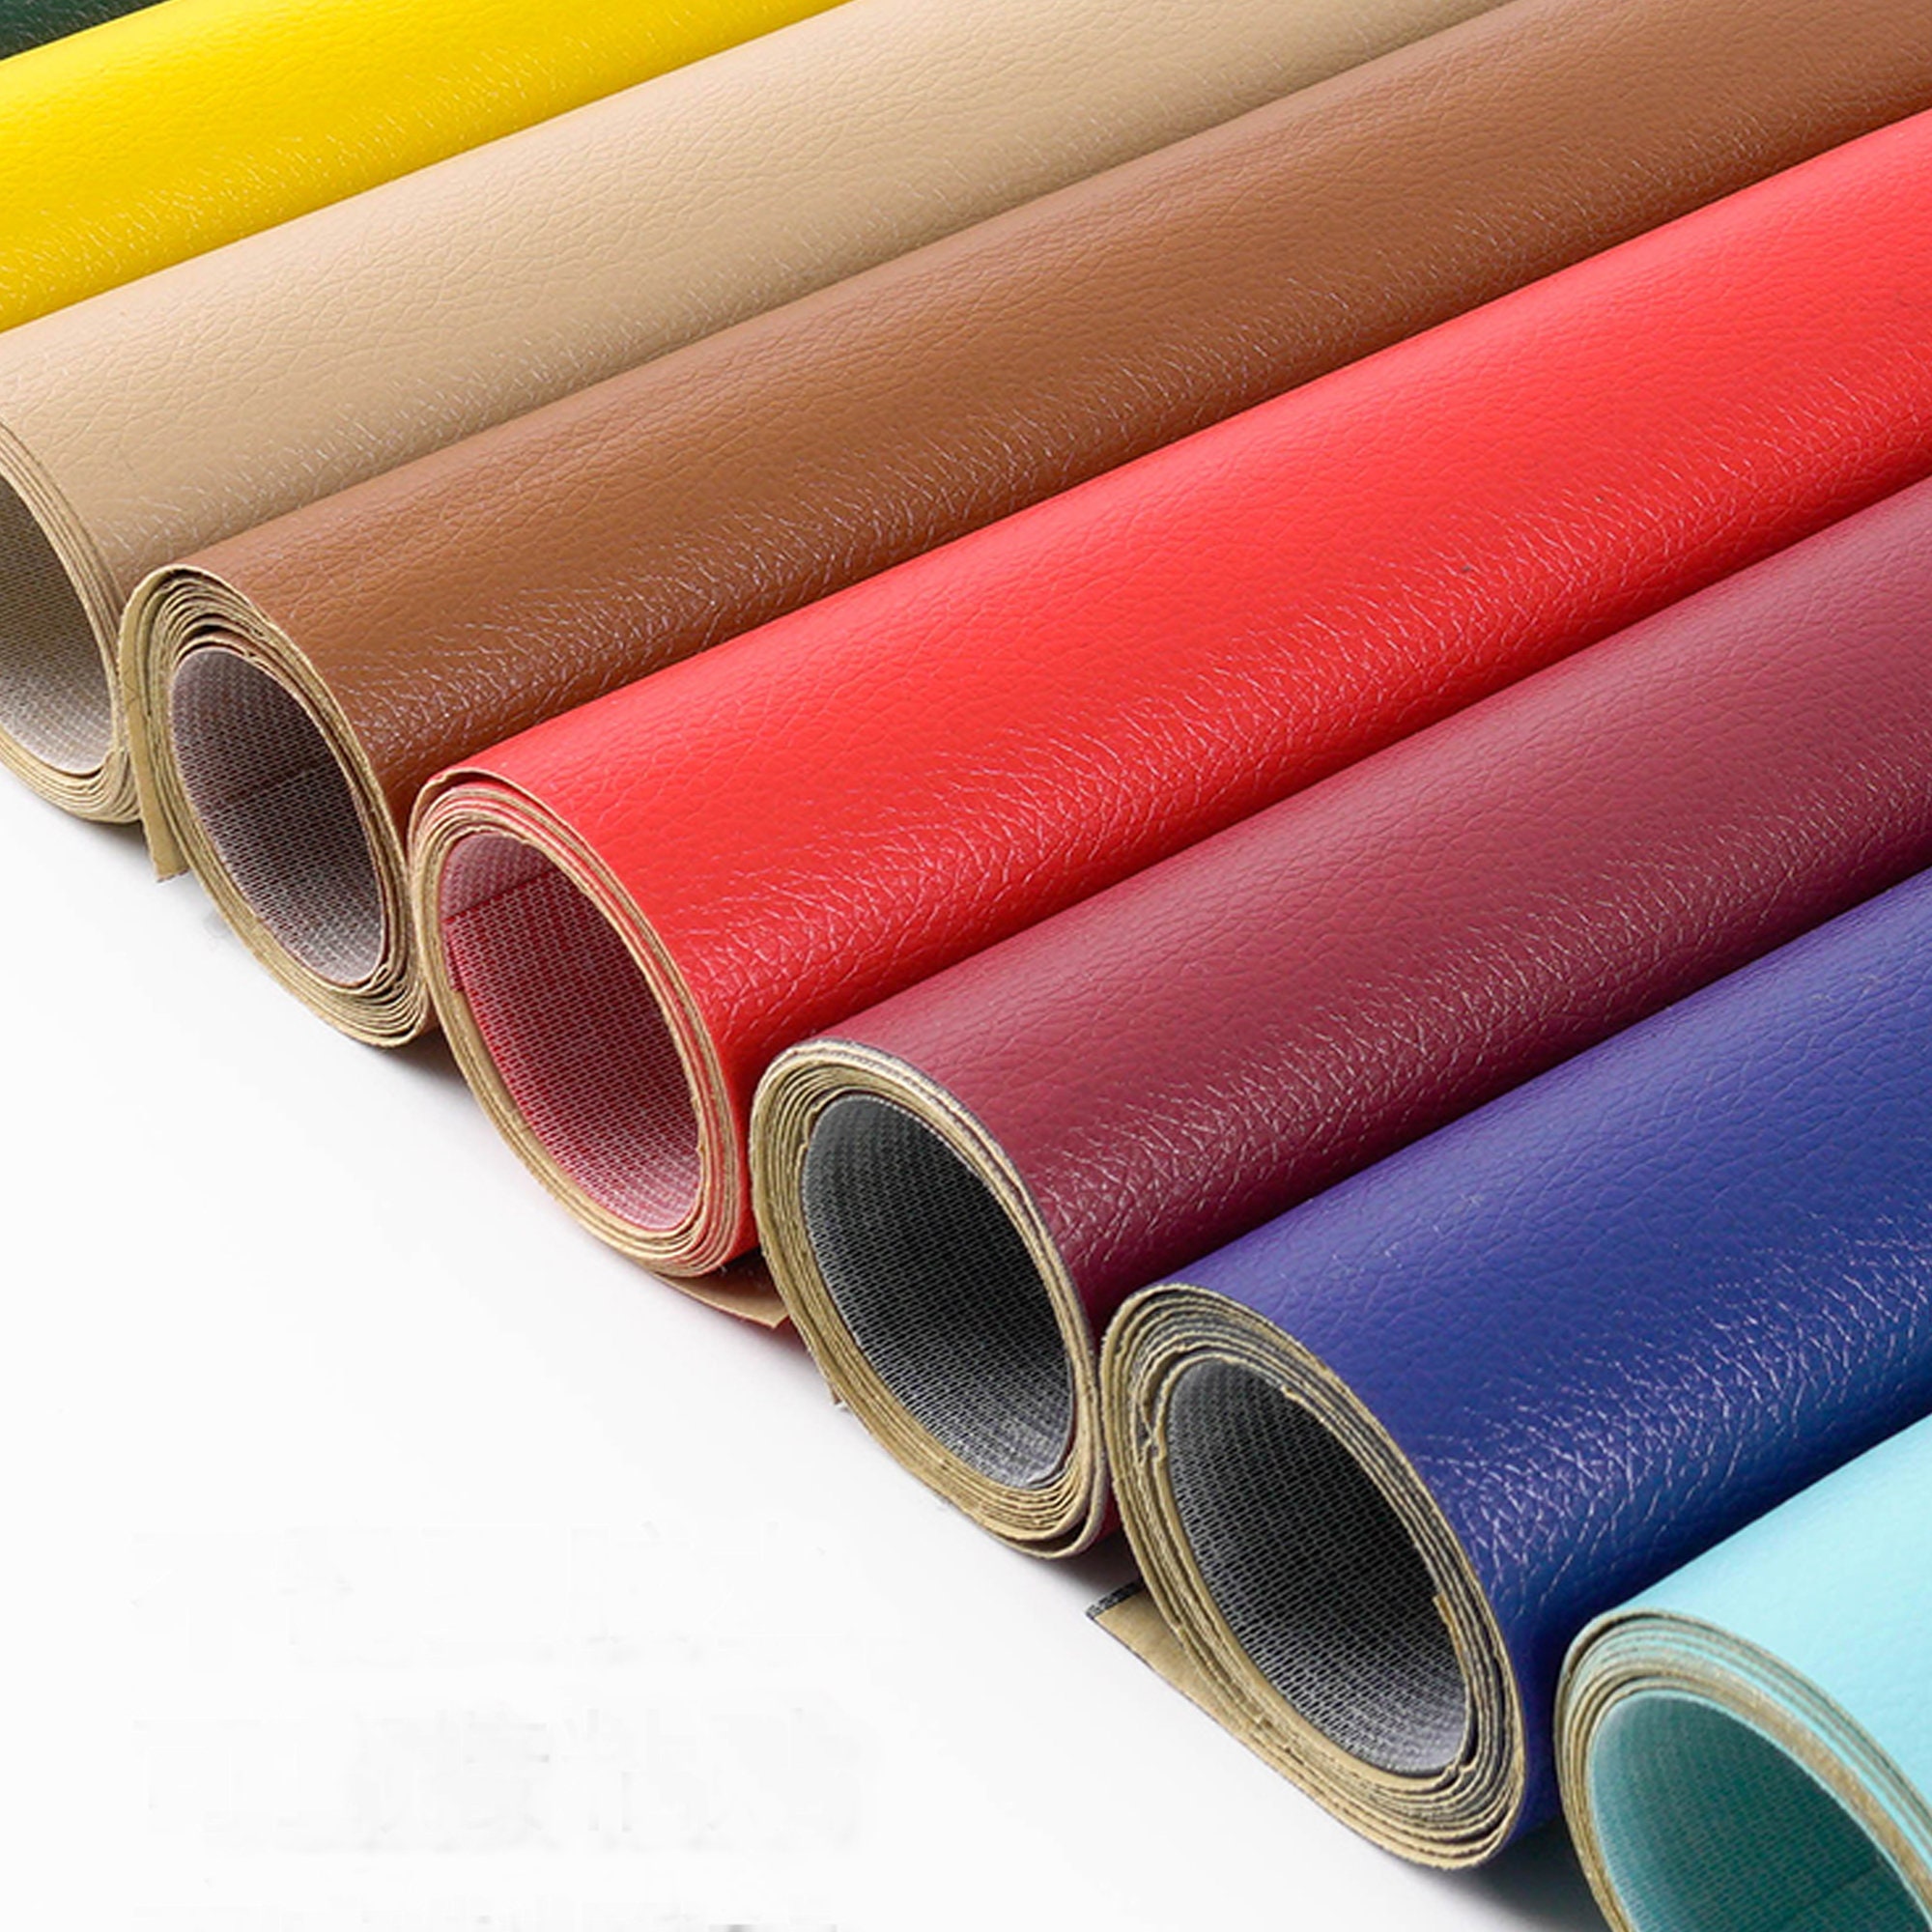 Soft Faux Leather/ Repair Patch Tape / Self-adhesive Leather 